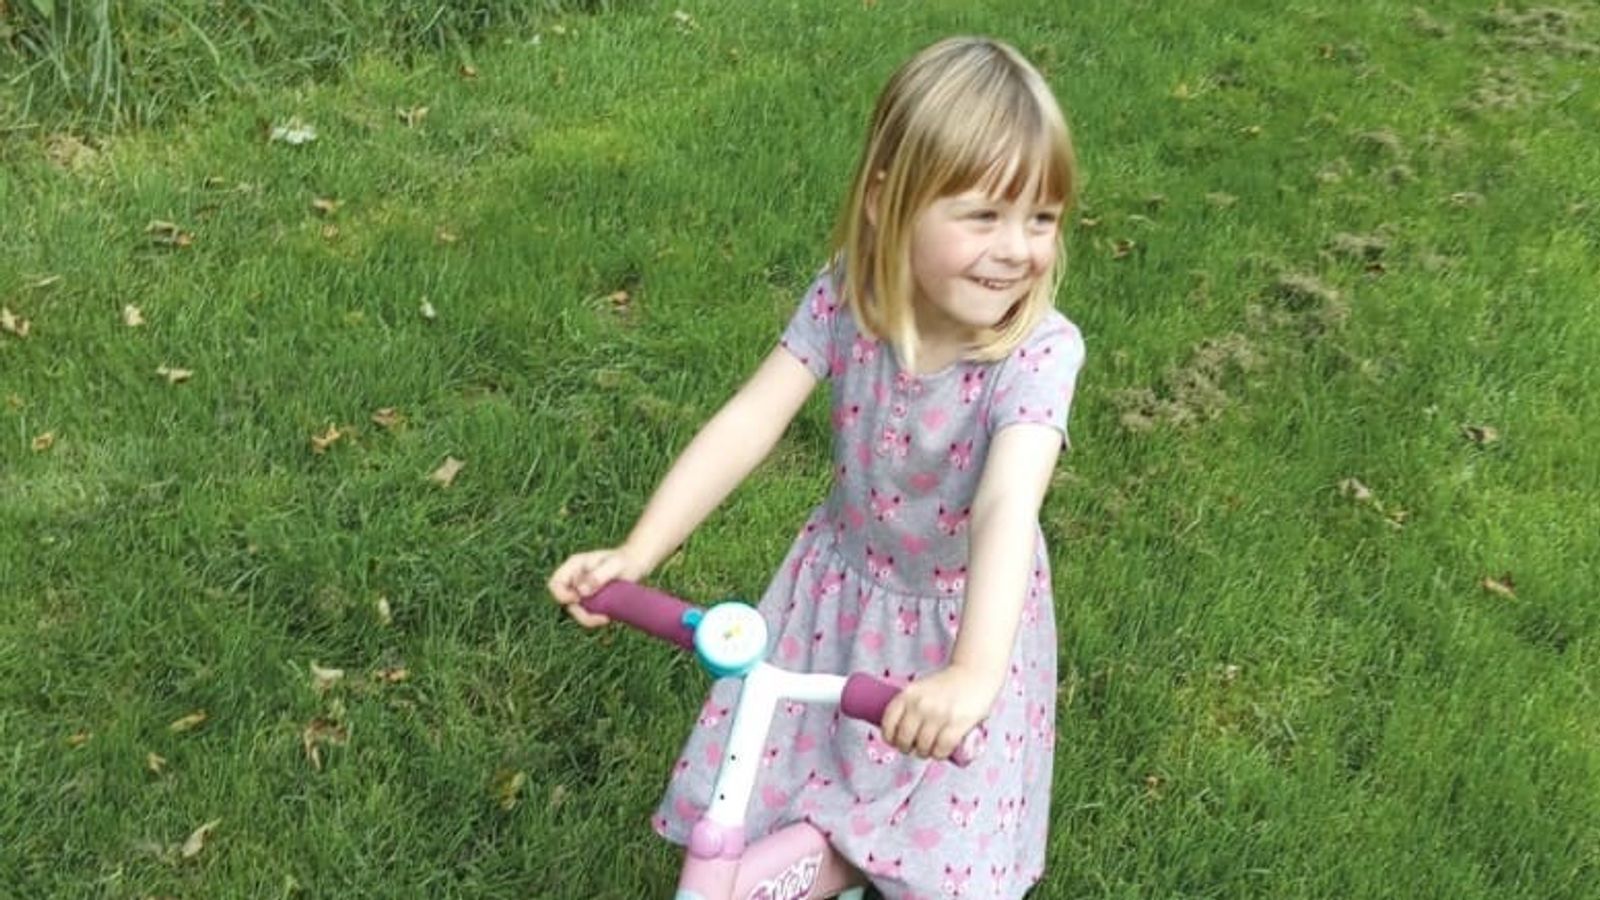 Girl, 5, dies in house fire near Crymych, Pembrokeshire